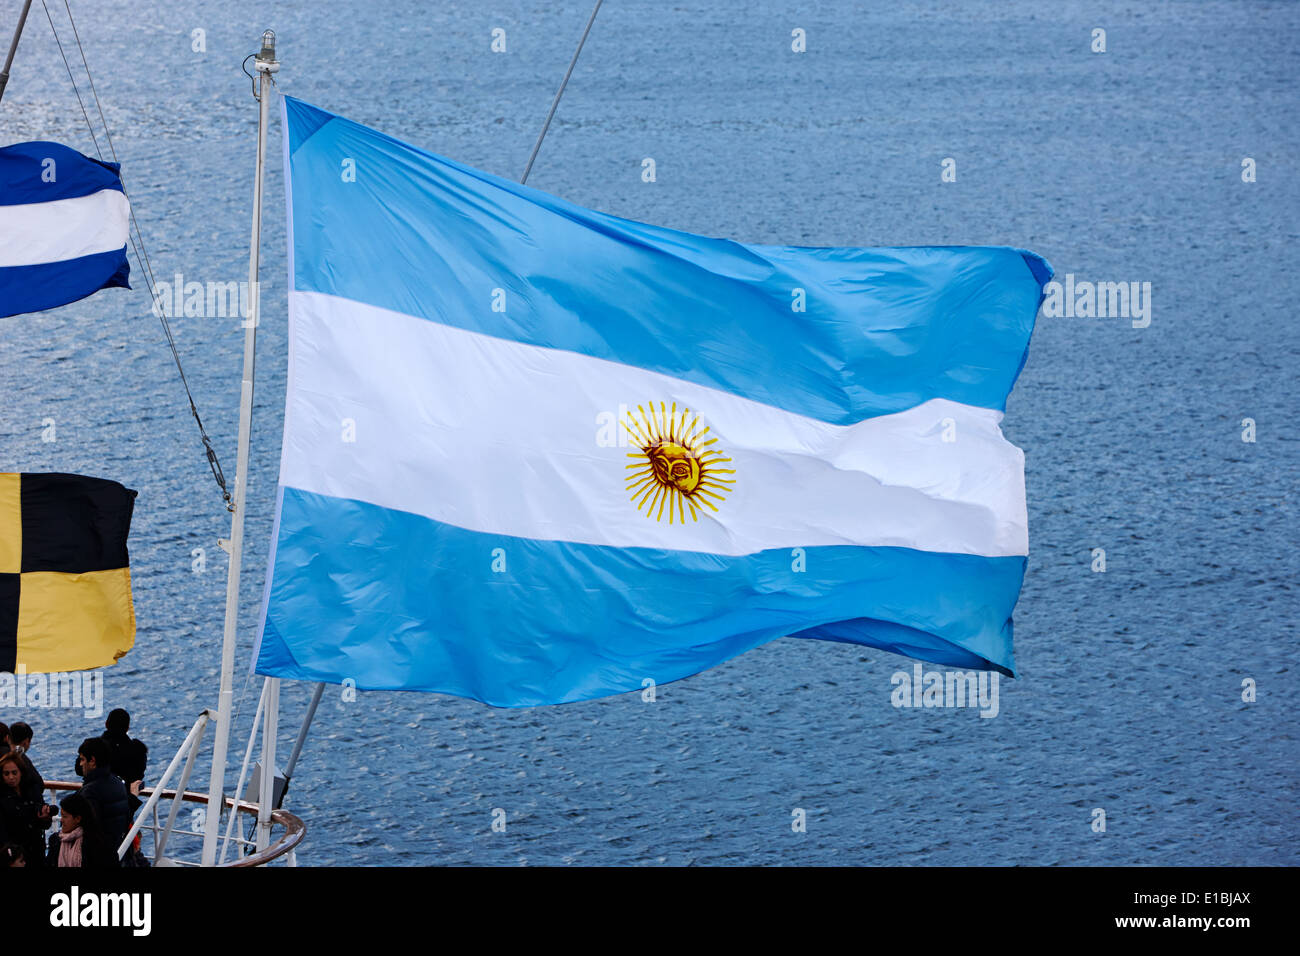 large argentinian flag flying off the back of a boat in Ushuaia Argentina Stock Photo